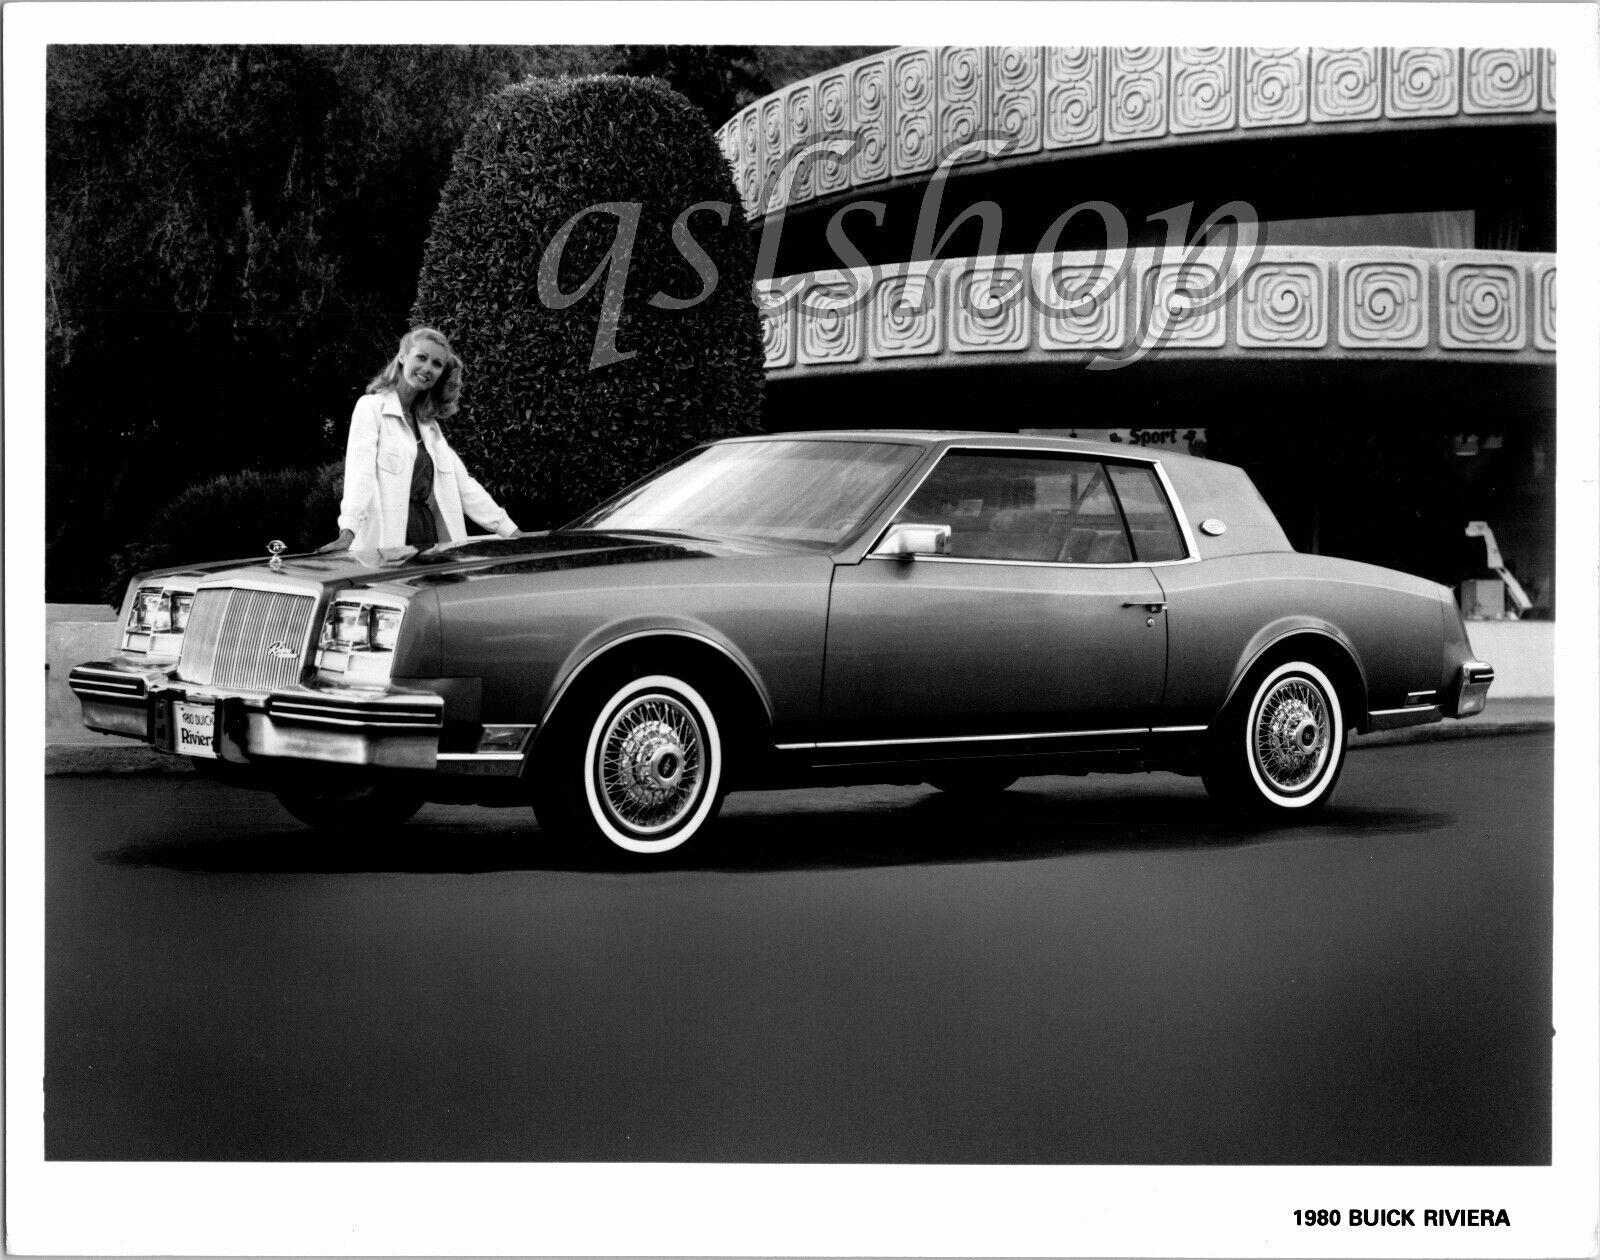 1980 Buick Riviera Two Door Coupe Press Release Photo Classic Car GM